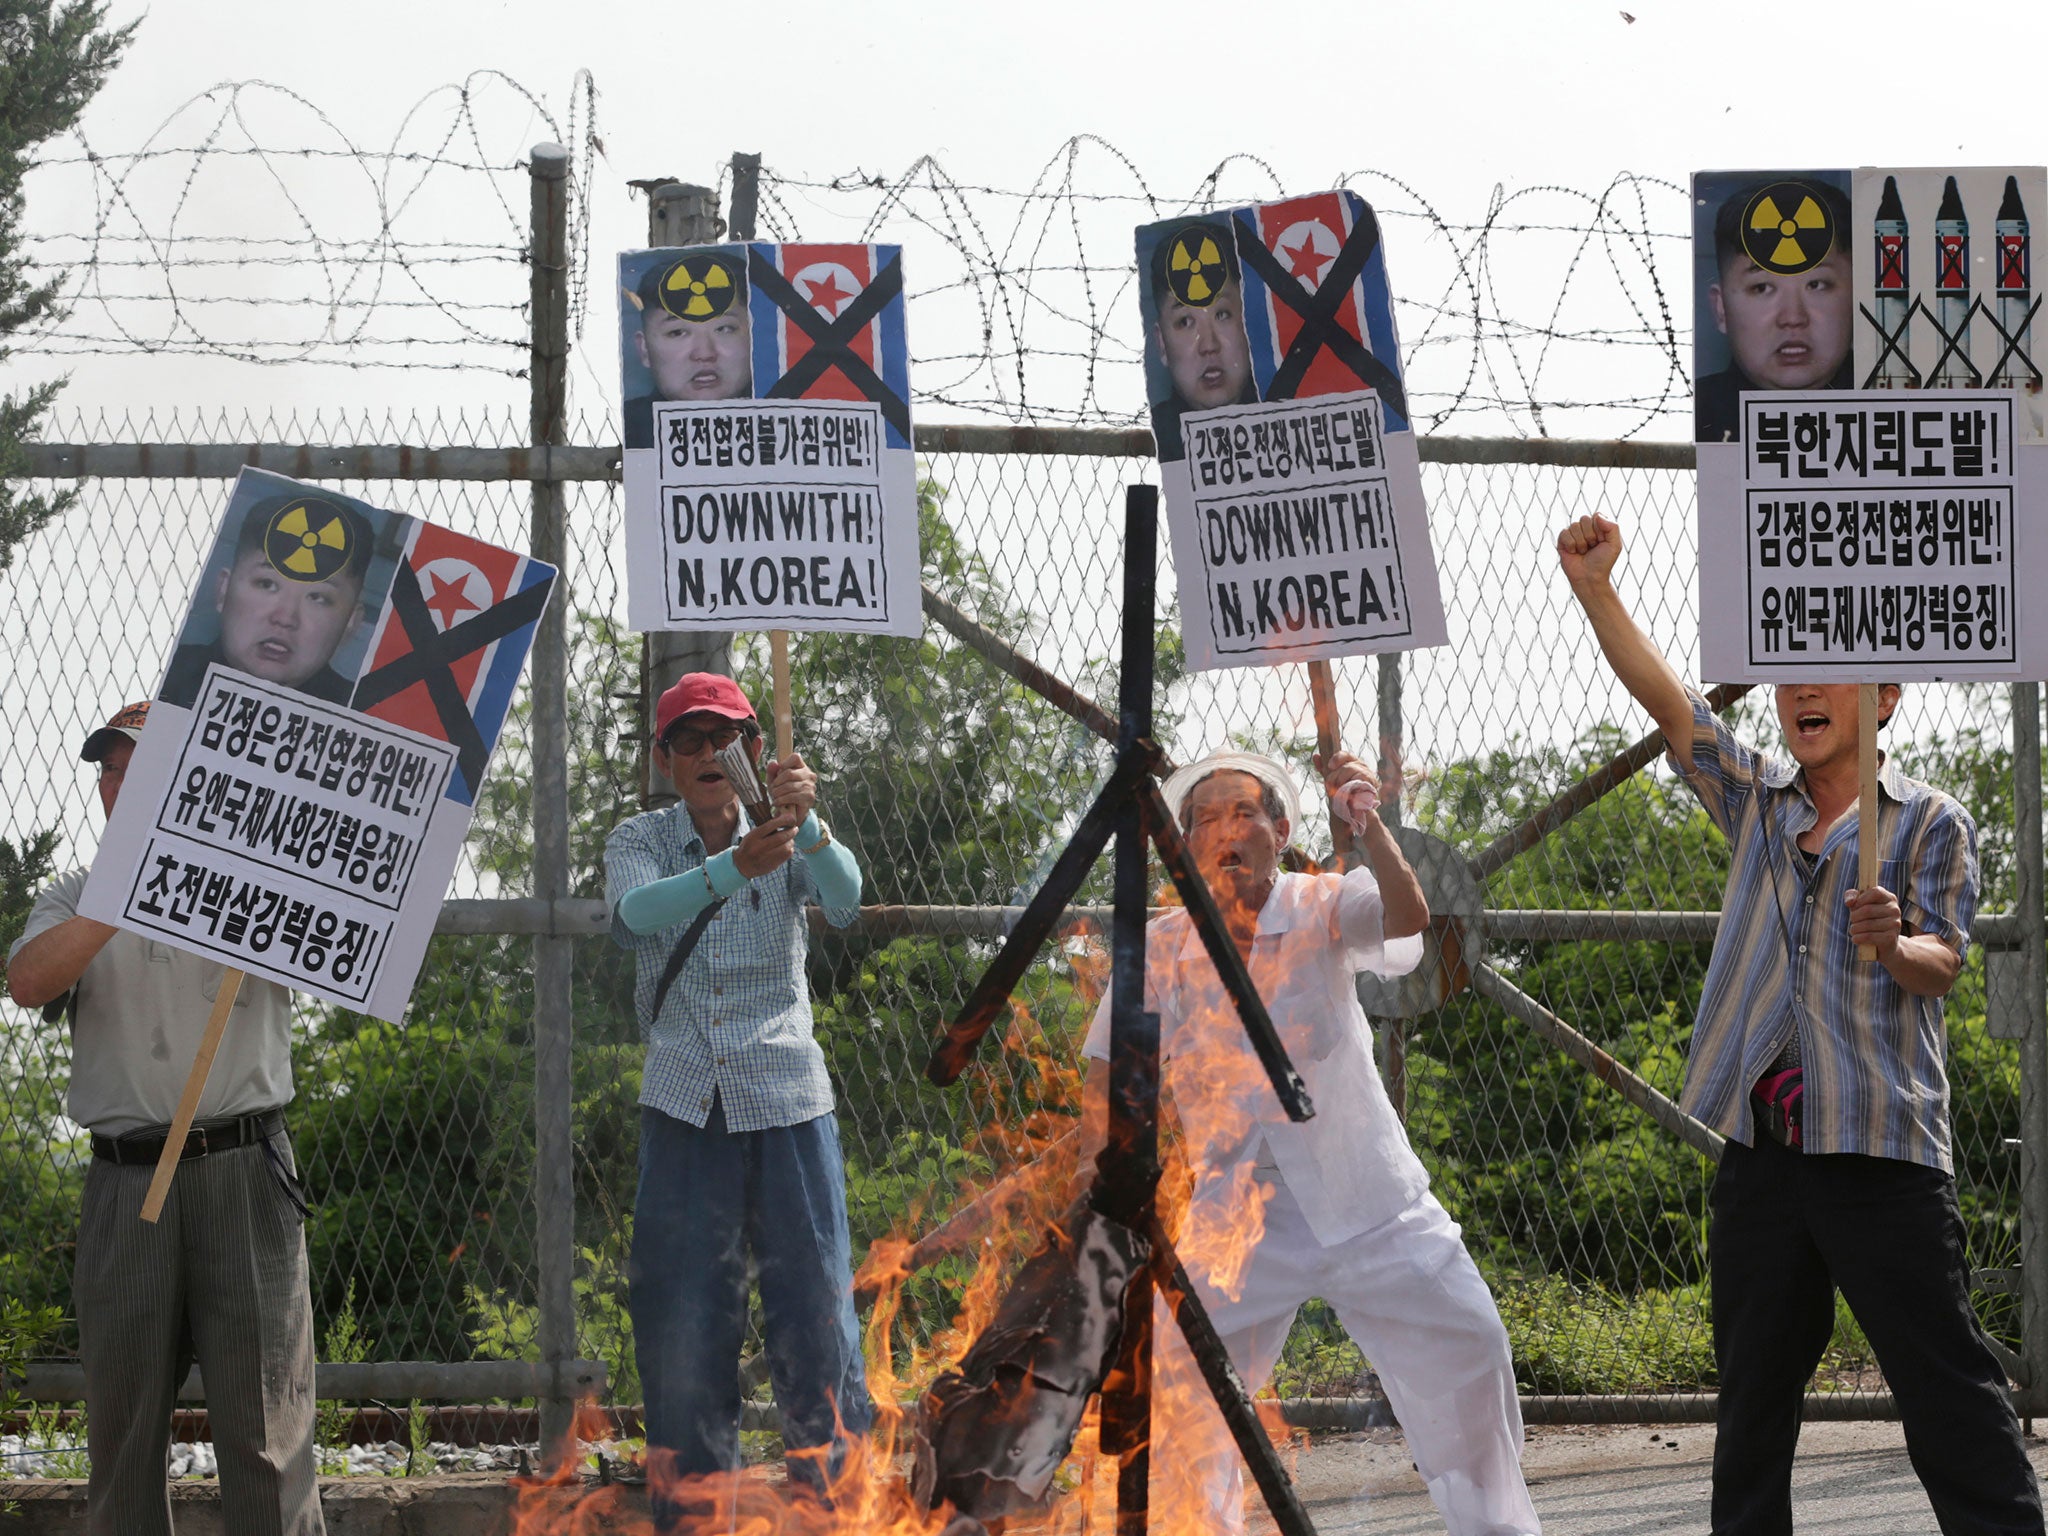 Members of South Korean conservative group shout slogans after burning an effigy of North Korean leader Kim Jong Un and North Korean flags during a rally denouncing the North